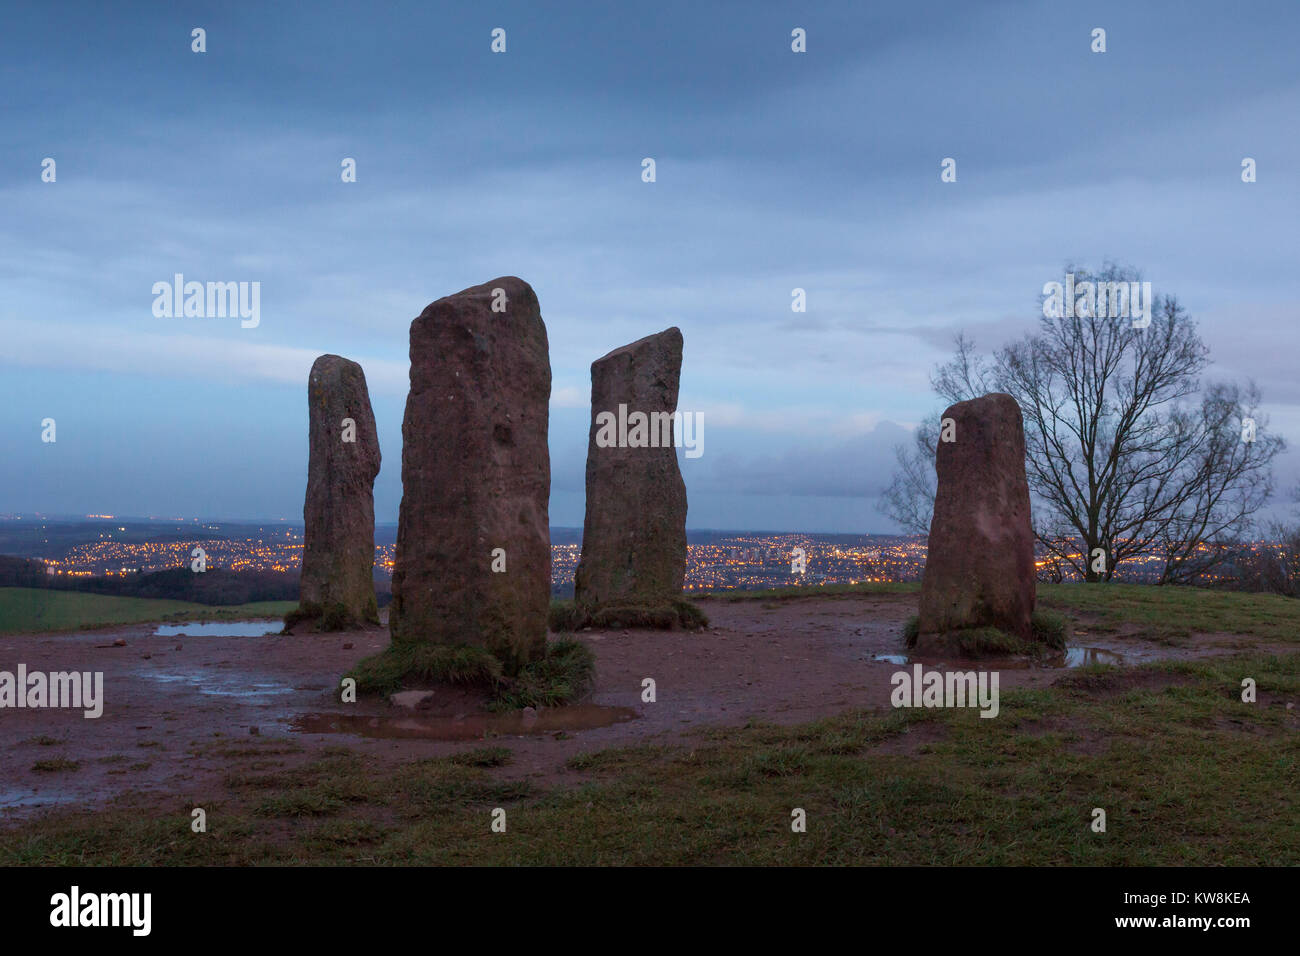 Clent, Worcestershire, UK. 31st December, 2017. On the last day of 2017, a gloomy dawn sky is pictured over the four stones in the Clent Hills, just southwest of Birmingham and the Black Country, UK.  Peter Lopeman/Alamy Live News Stock Photo